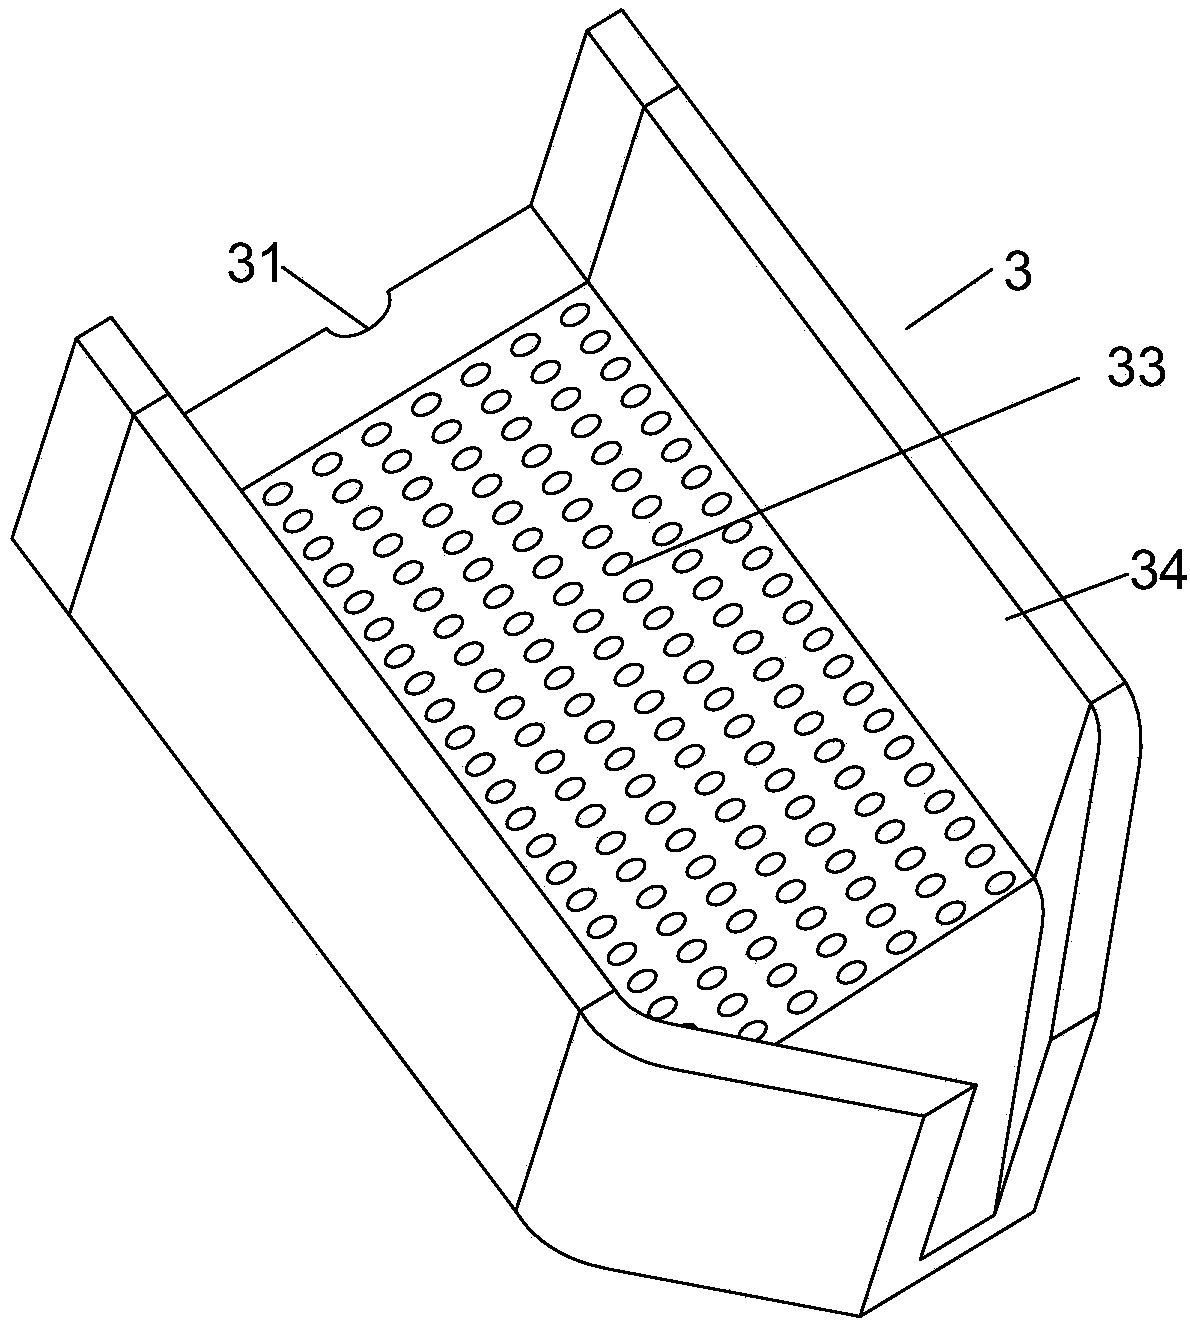 Construction mud treatment device for building pile foundation